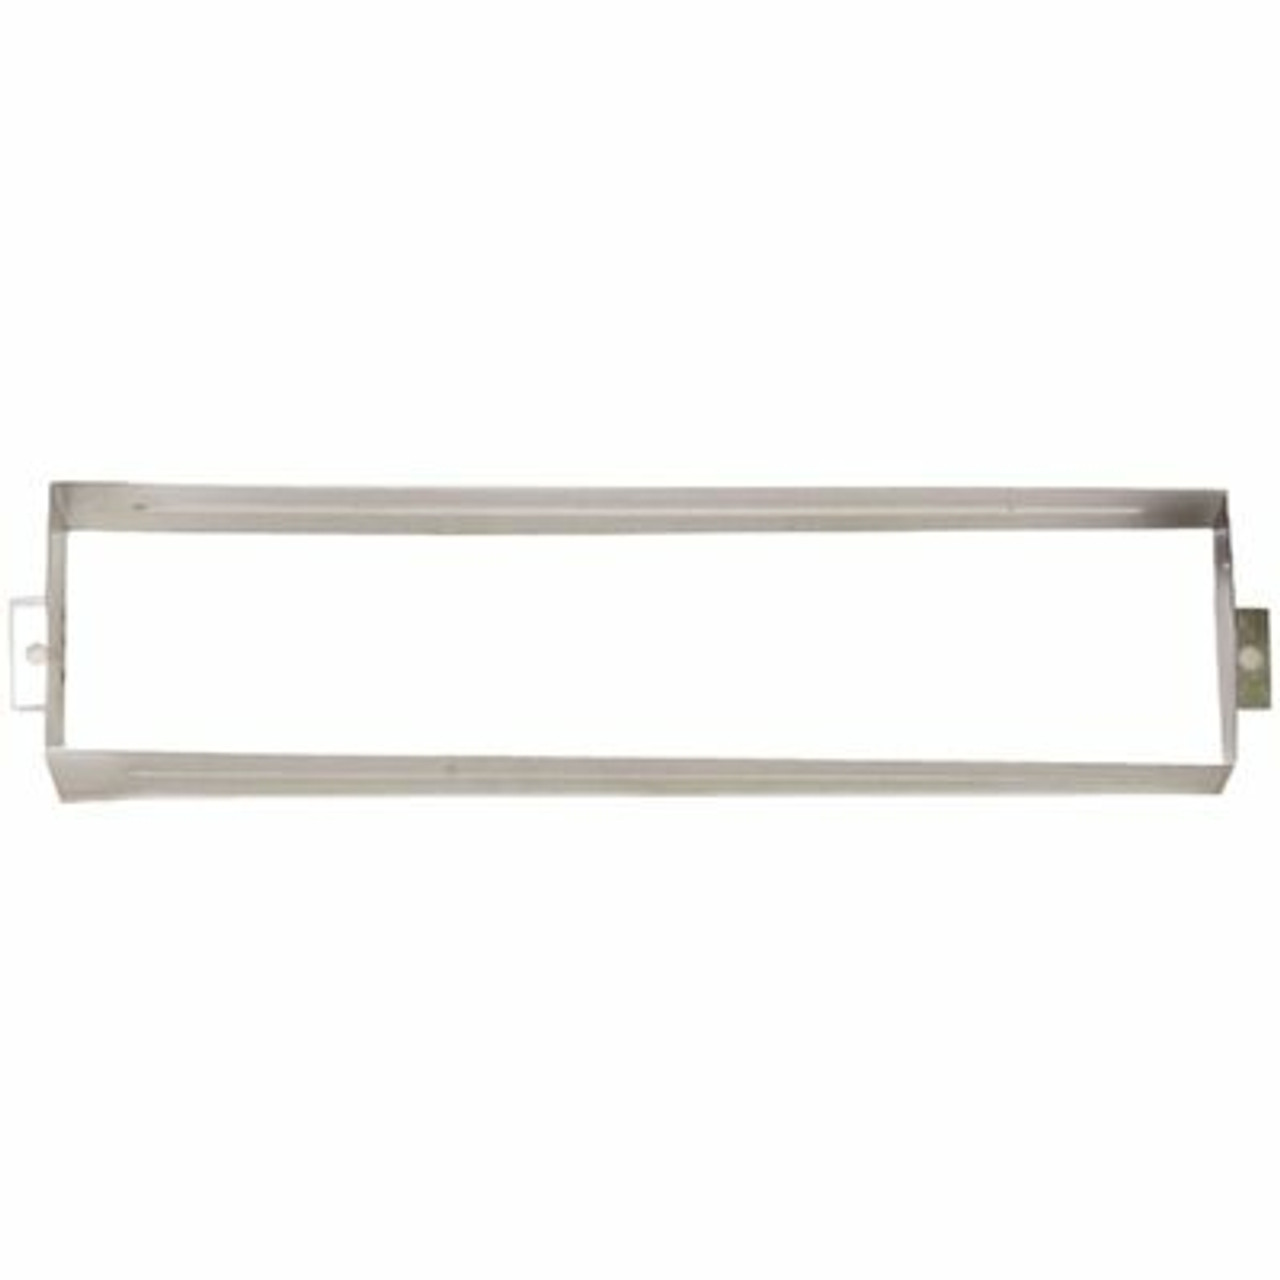 Gibraltar Mailboxes Mail Slot Sleeve Accessory, Stainless Steel